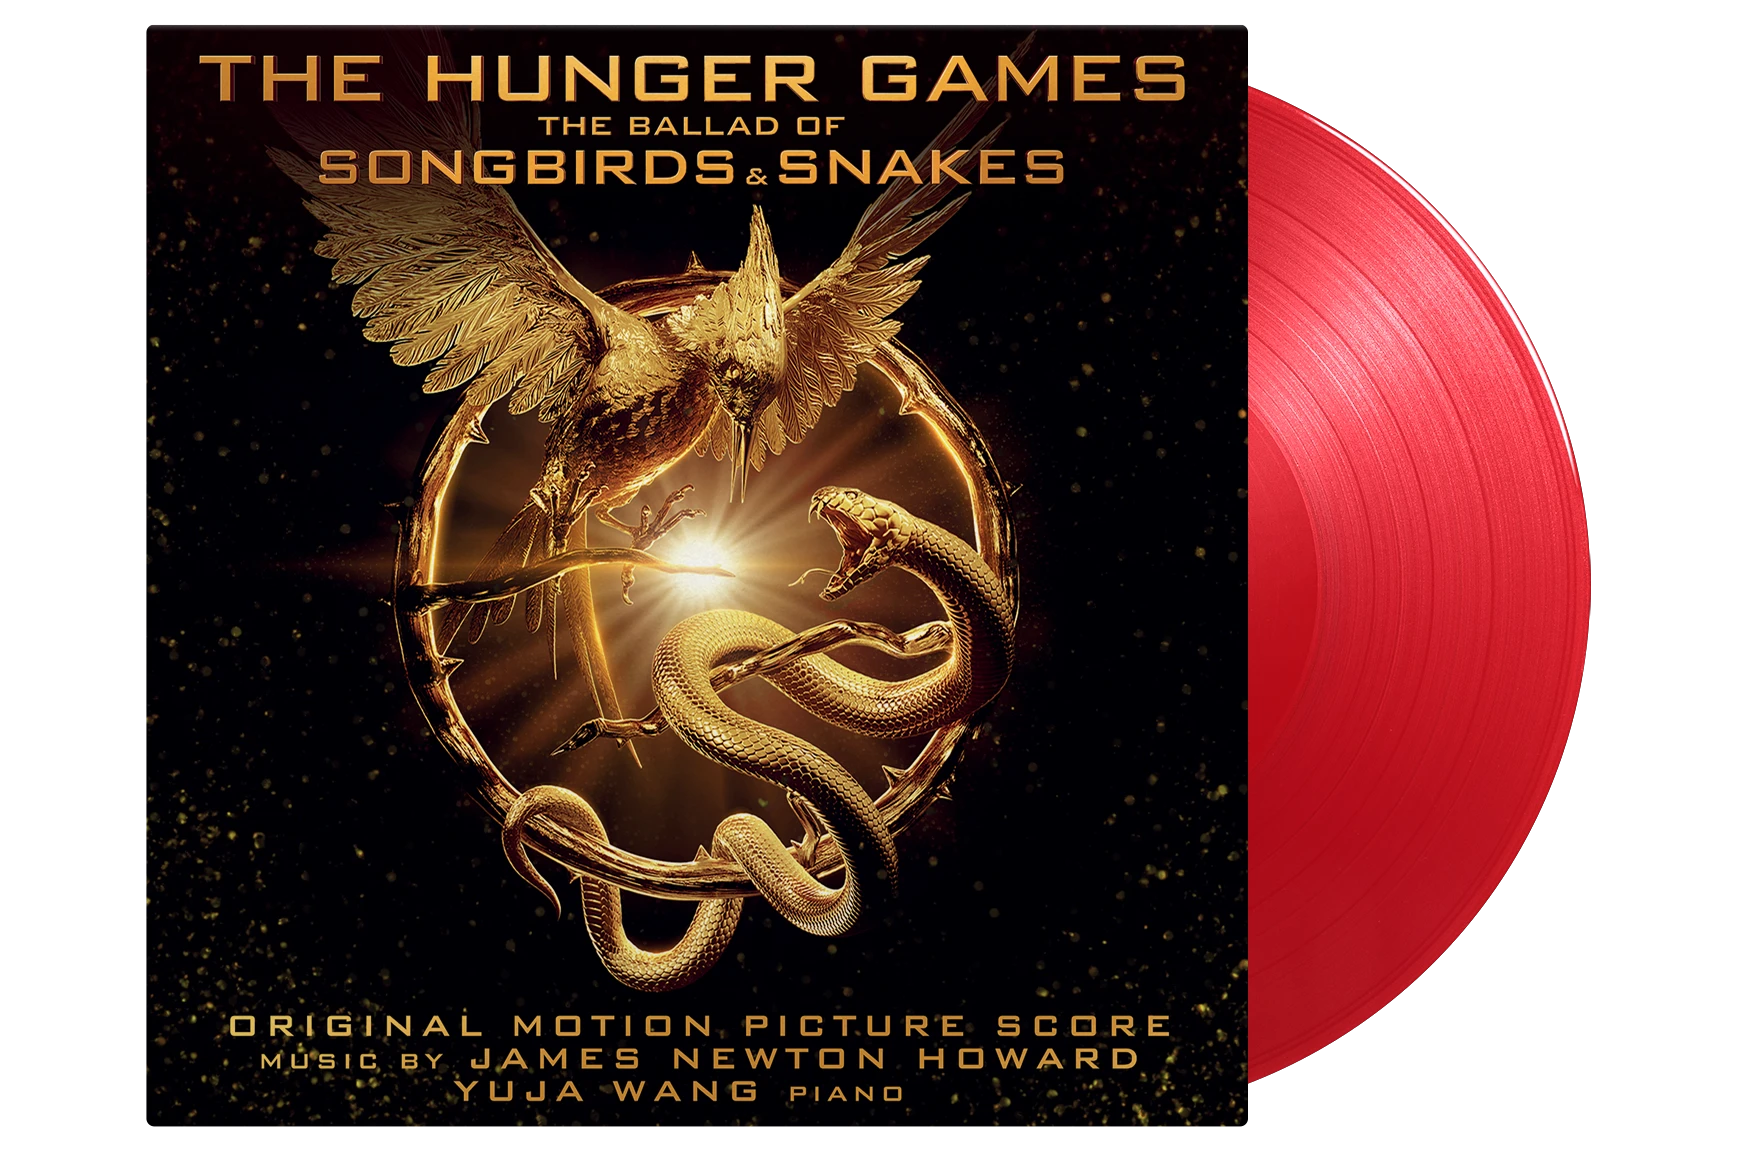 The Hunger Games: The Ballad of Songbirds & Snakes - Vinyle couleur